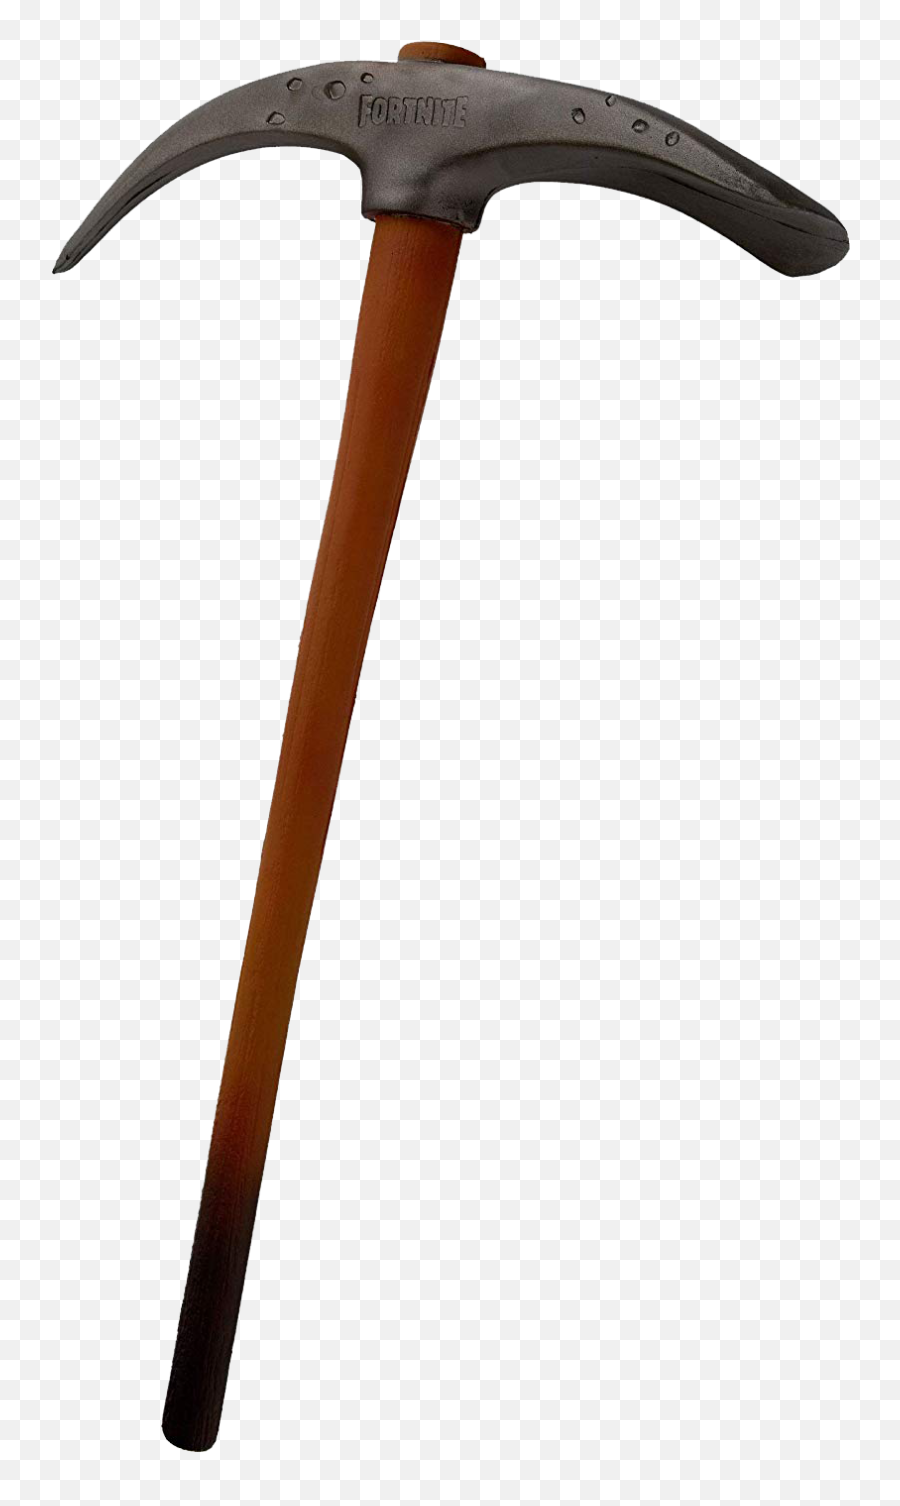 Fortnite Pickaxe Transparent Background 7 Free Tiers - Spirit Halloween Fortnite Pickaxe Png,Fortnite Pickaxe Transparent